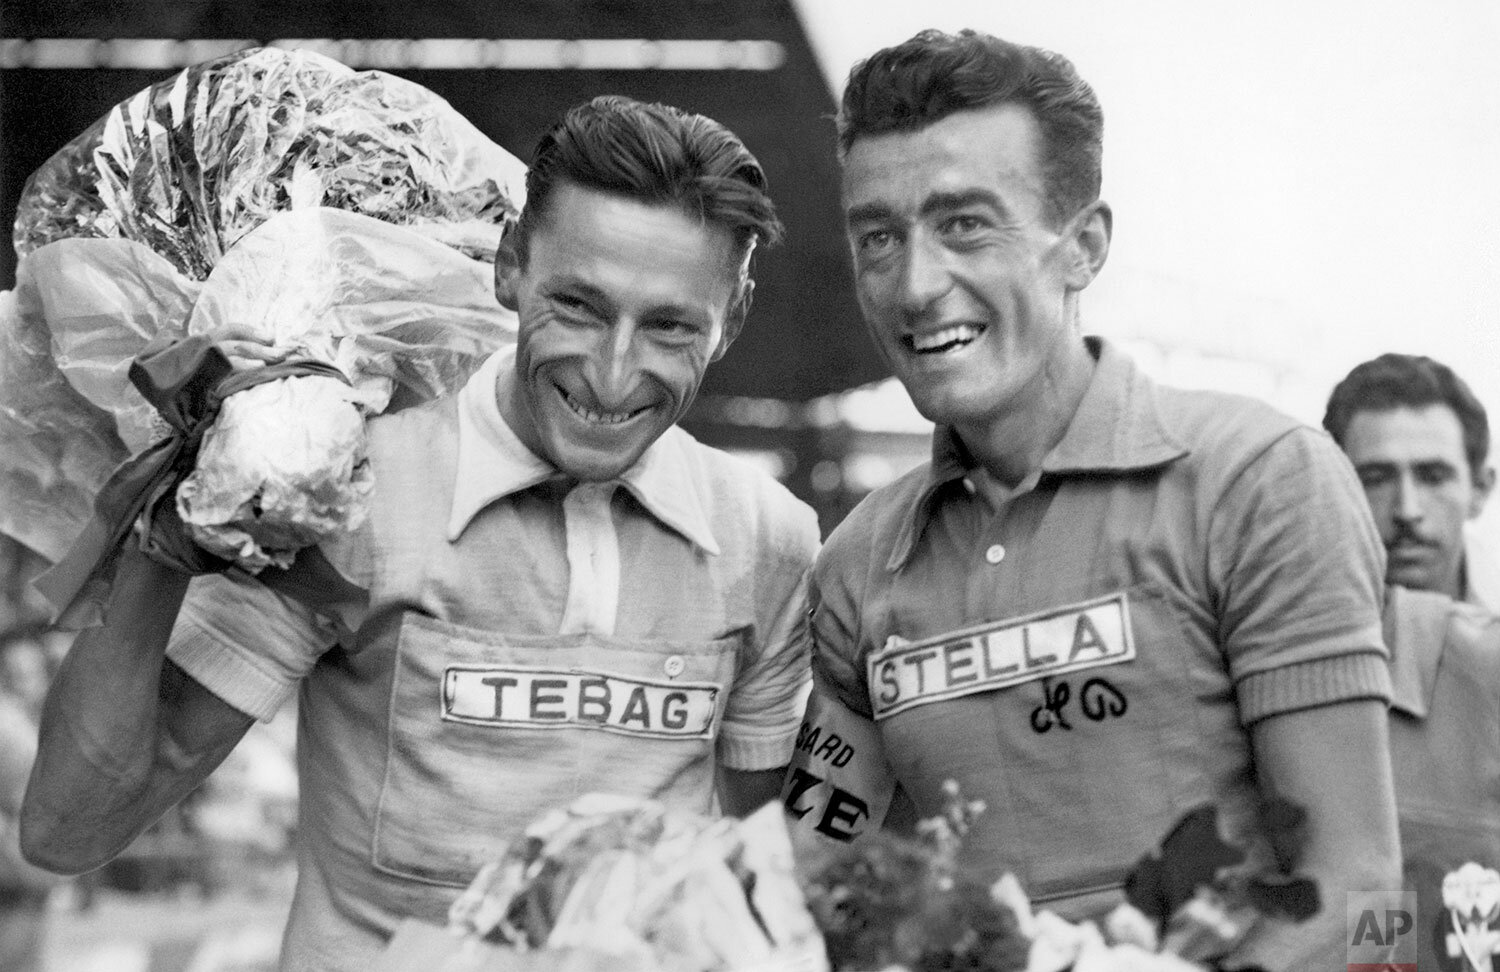  Winner of the Tour de France 1954, Louison Bobet from France, right, and Second placed Ferdi Kuebler from Switzerland, left, pose August 1, 1954, in Paris after the final 23th stage from Troyes to Paris, at the Stadion Parc des Princes. (AP Photo)  